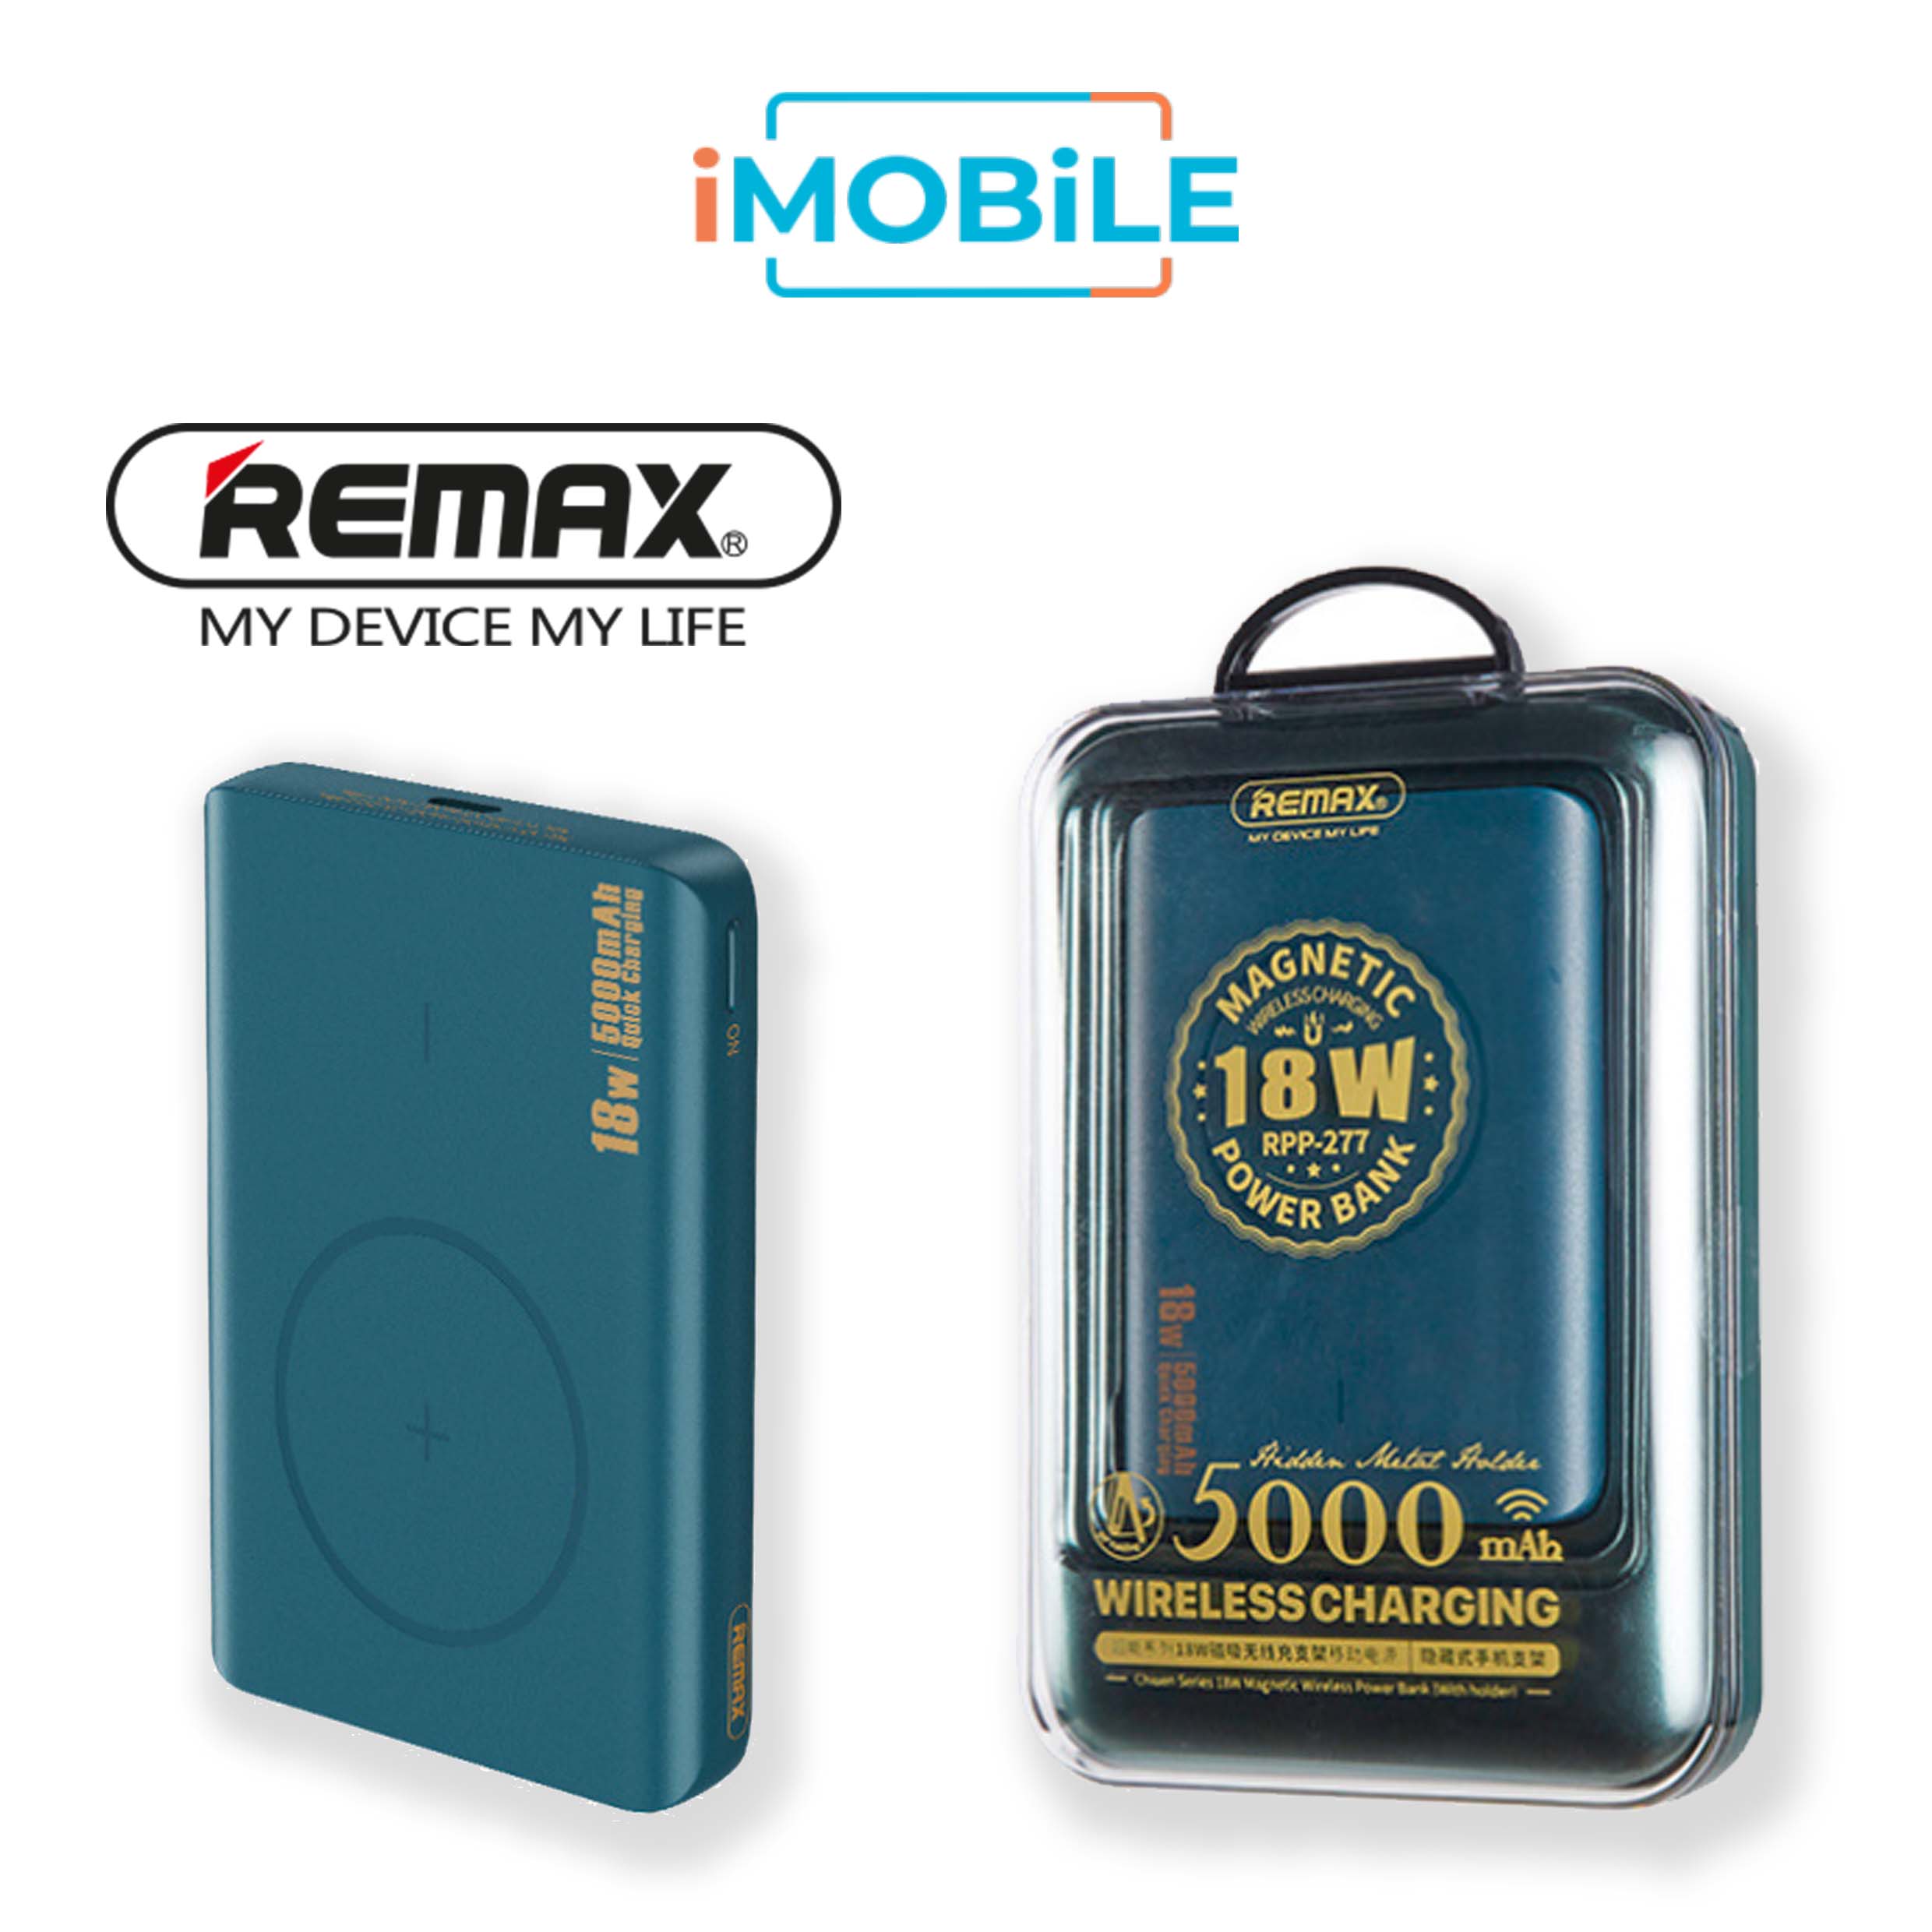 Remax 18W Chiuen Series Power Bank with Magsafe and Holder [RPP-277] [5,000 mAh] [1 Ports + Wireless MagSafe] Remax 22.5W Power Bank with Magsafe and Holder [RPP-277] [5,000 mAh] [1 Ports + MagSafe]